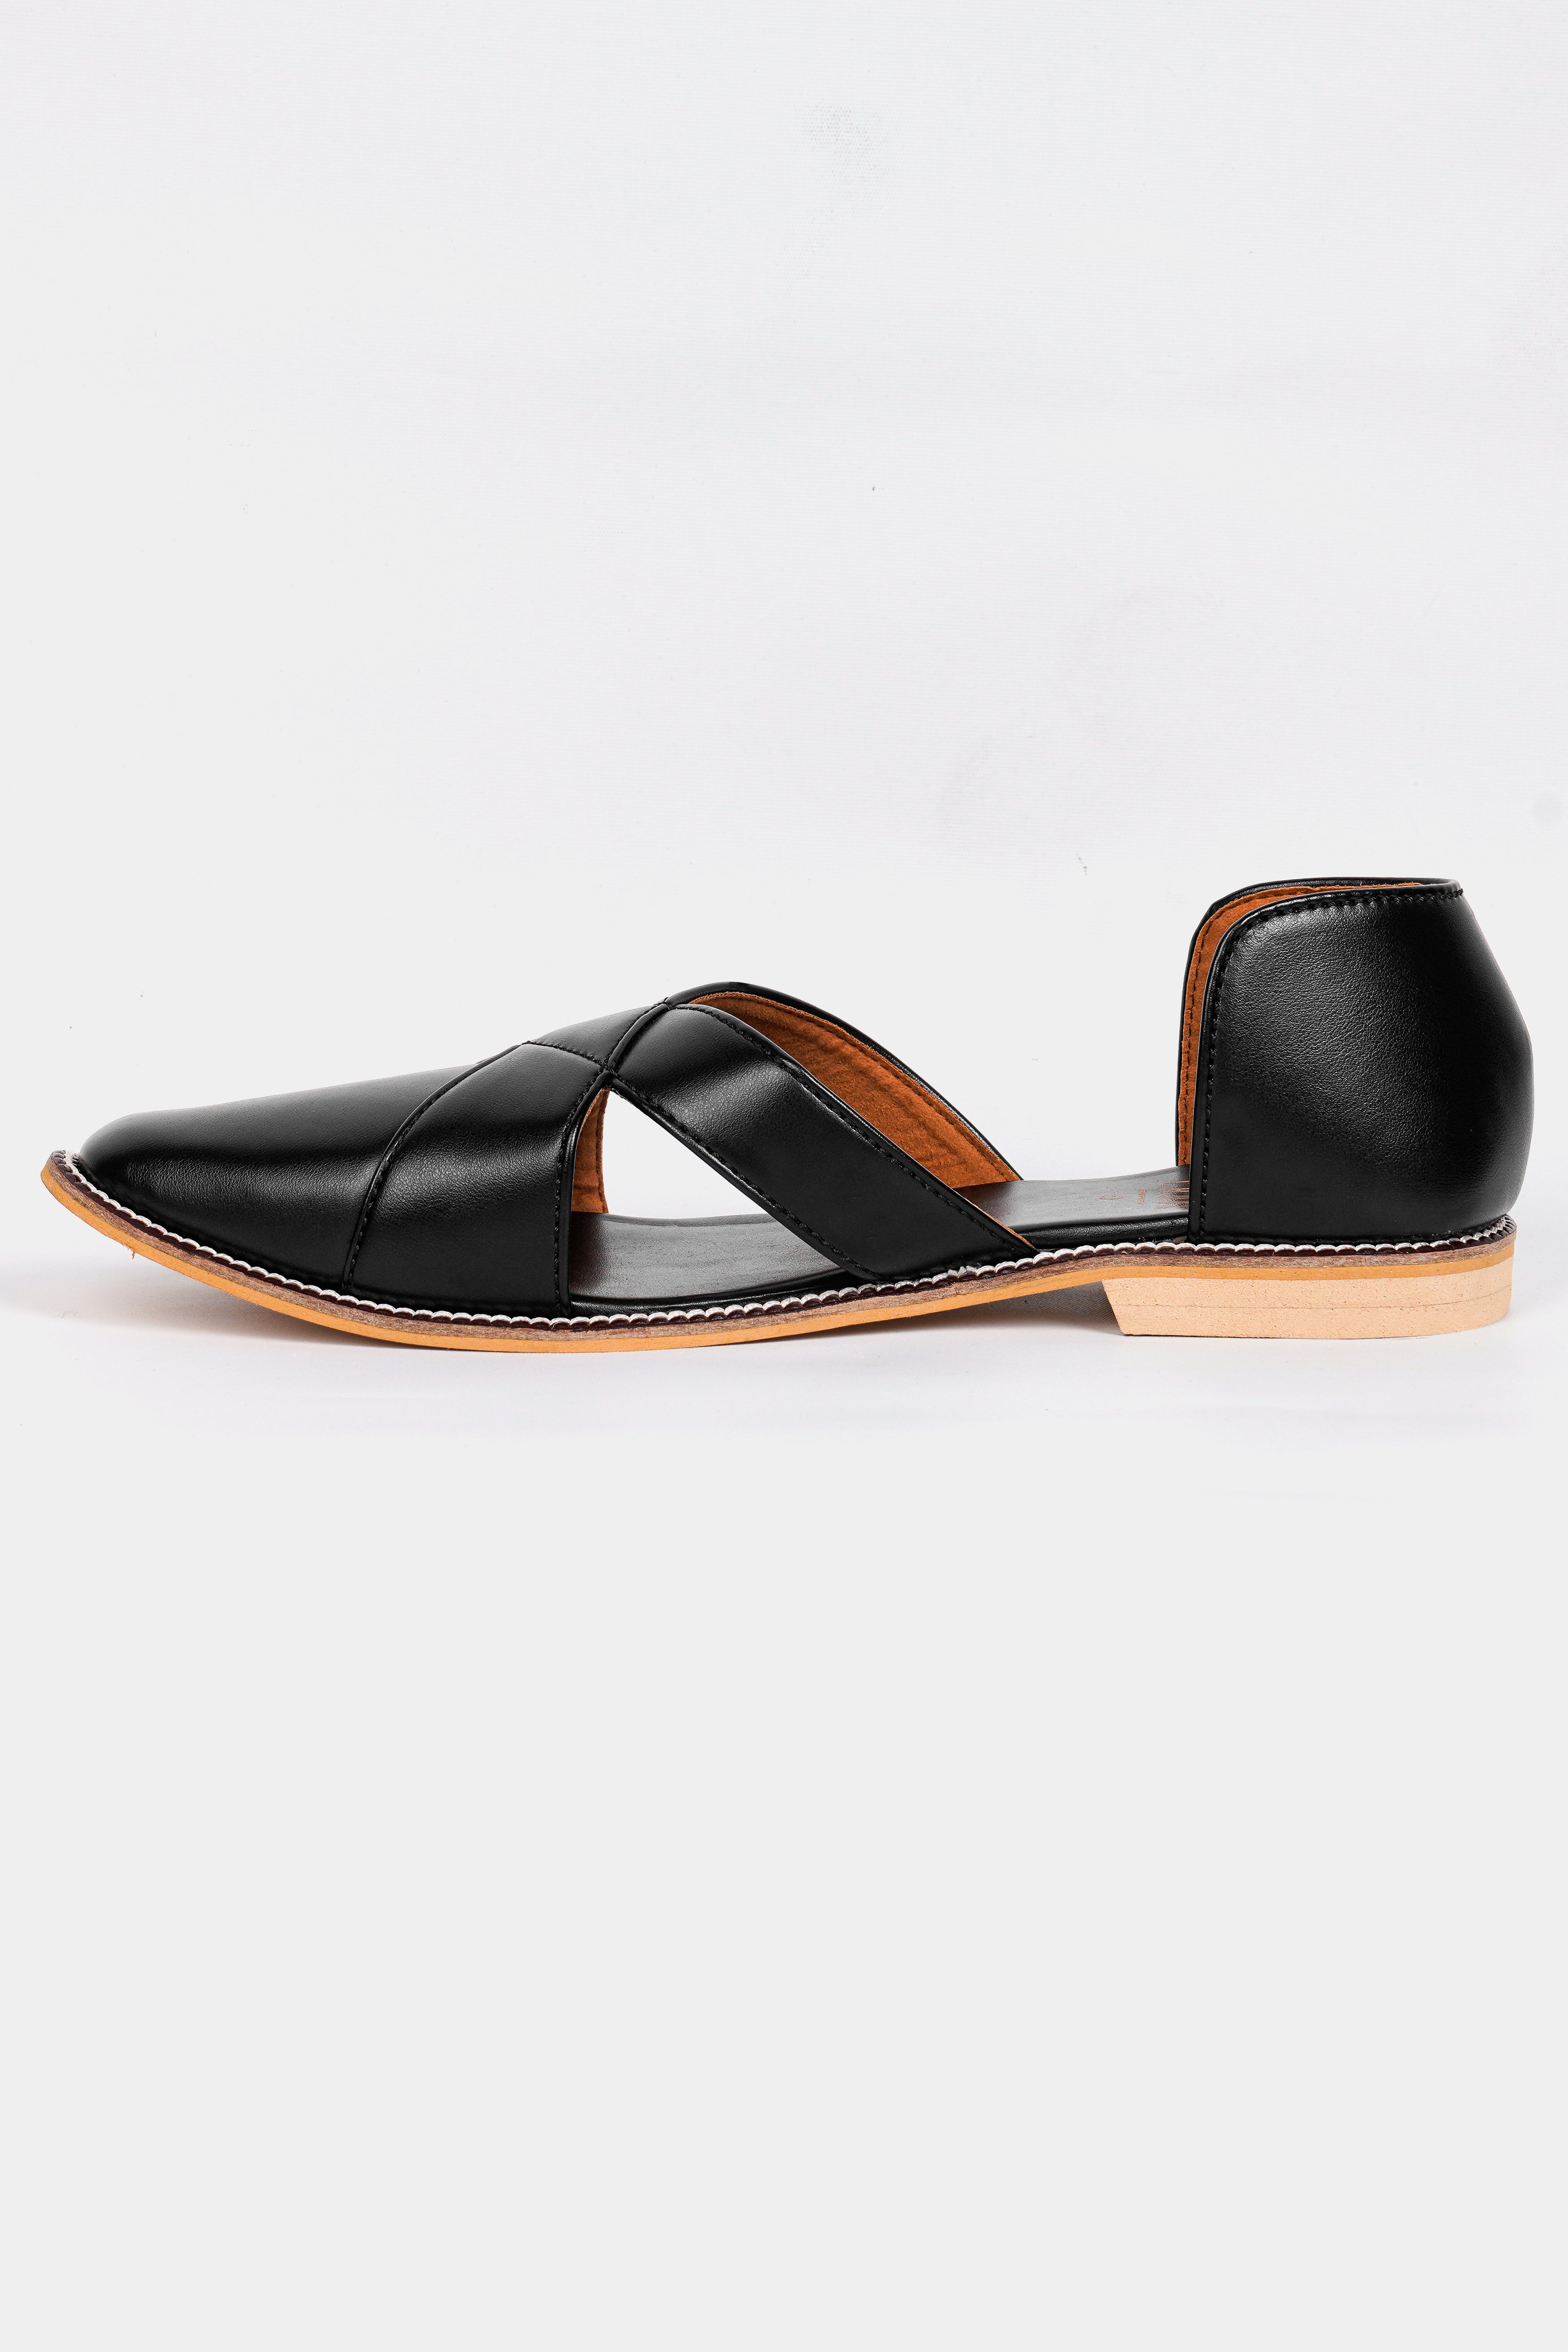 Jade Black Classic Criss Cross Vegan Leather Hand Stitched Pathanis Sandal FT127-6, FT127-7, FT127-8, FT127-9, FT127-10, FT127-11